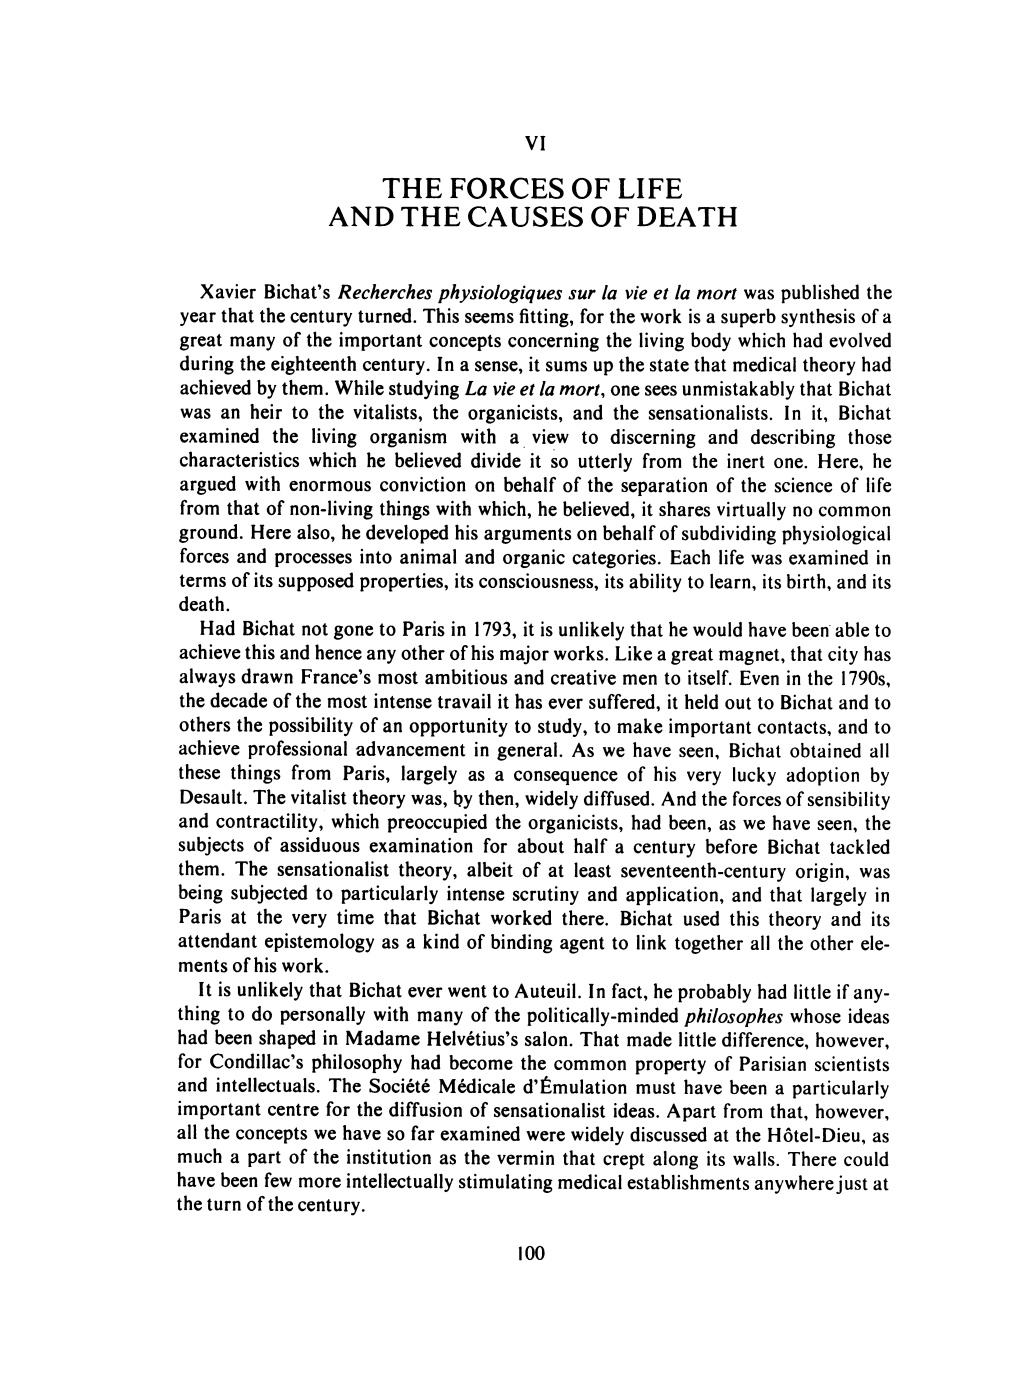 The Forces of Life and the Causes of Death